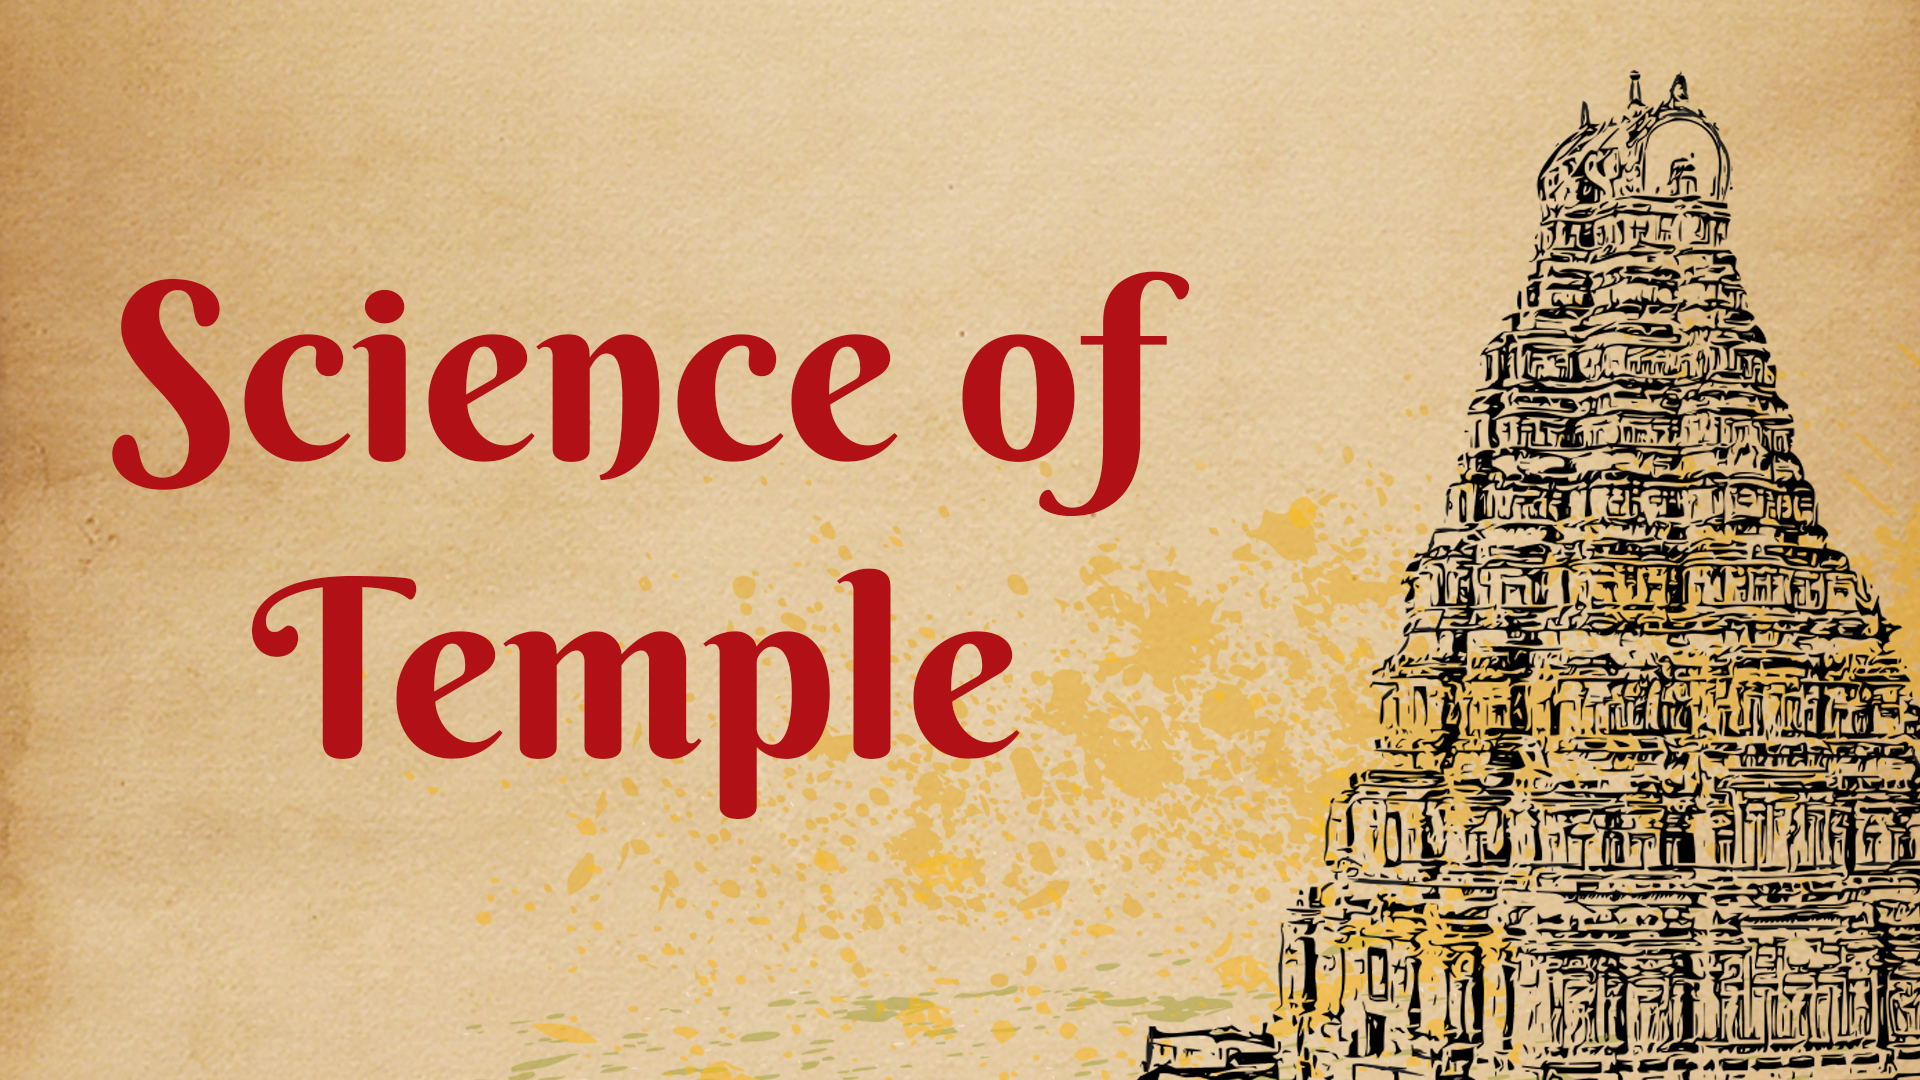 science of temple